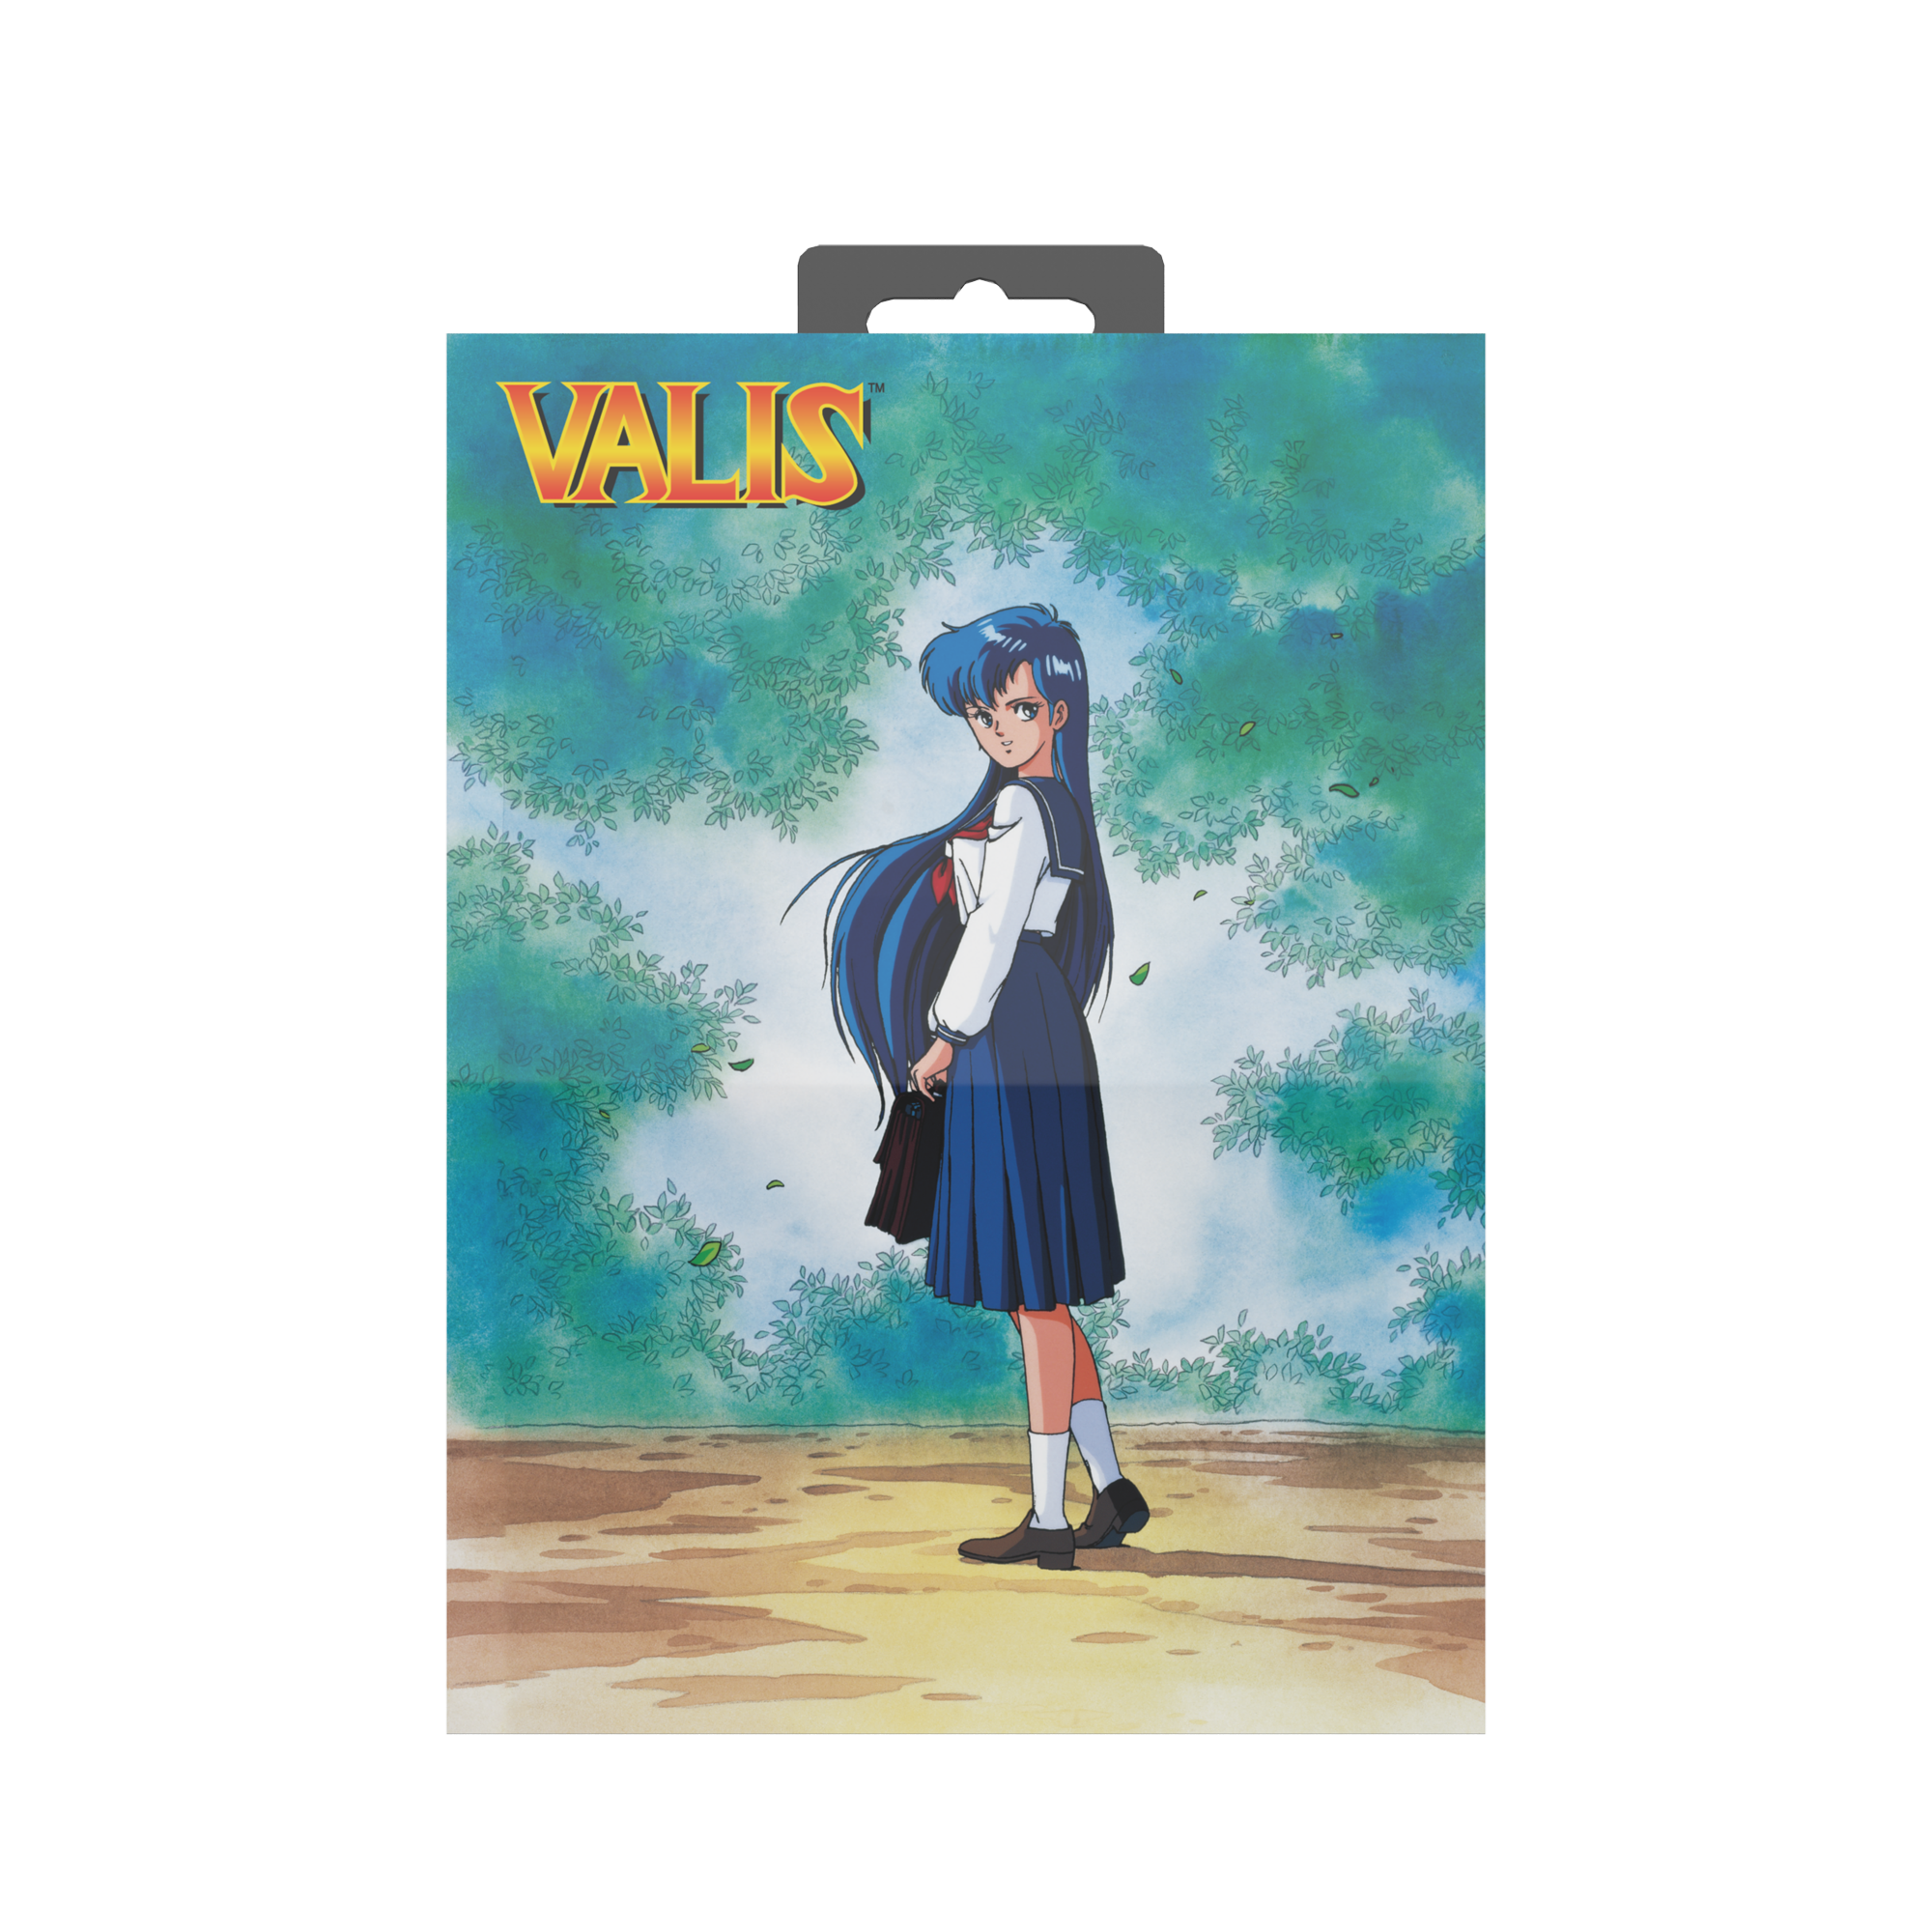 ValisCollectionPressKit Valis TFS Slipcover 00.png